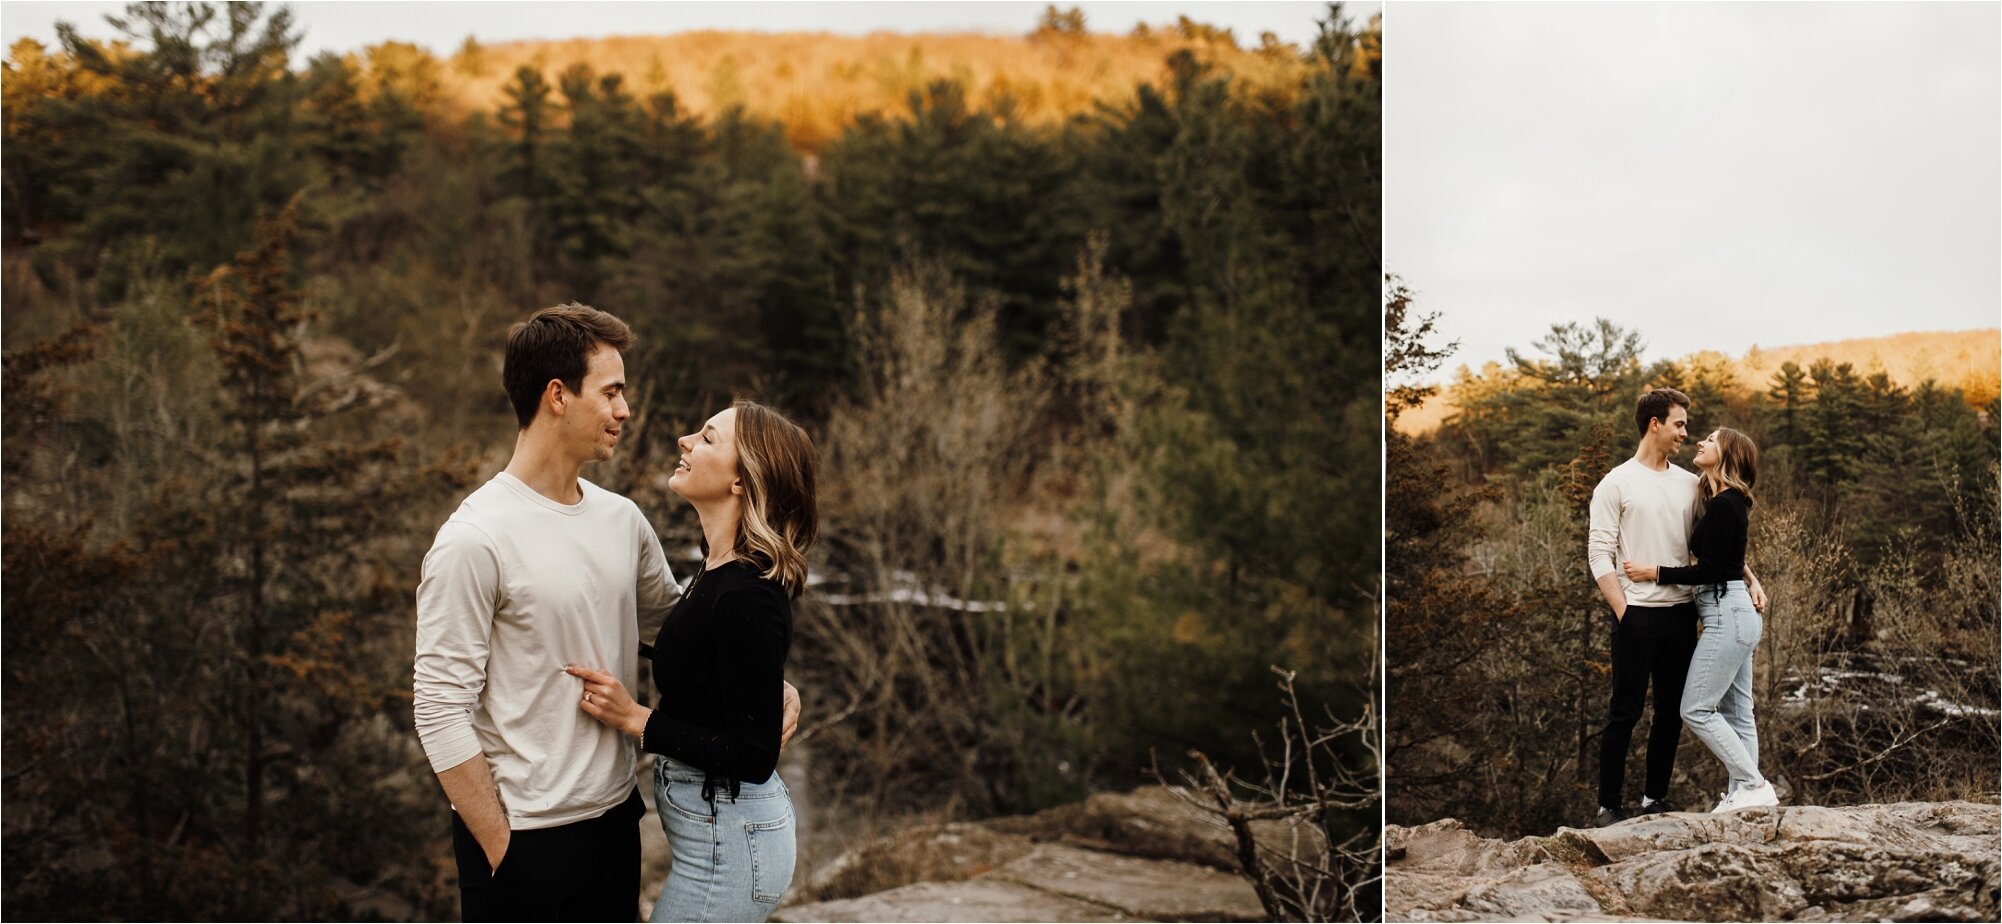  sunset along the st croix river along minnesota and wisconsin border at taylors falls photo session engagement 